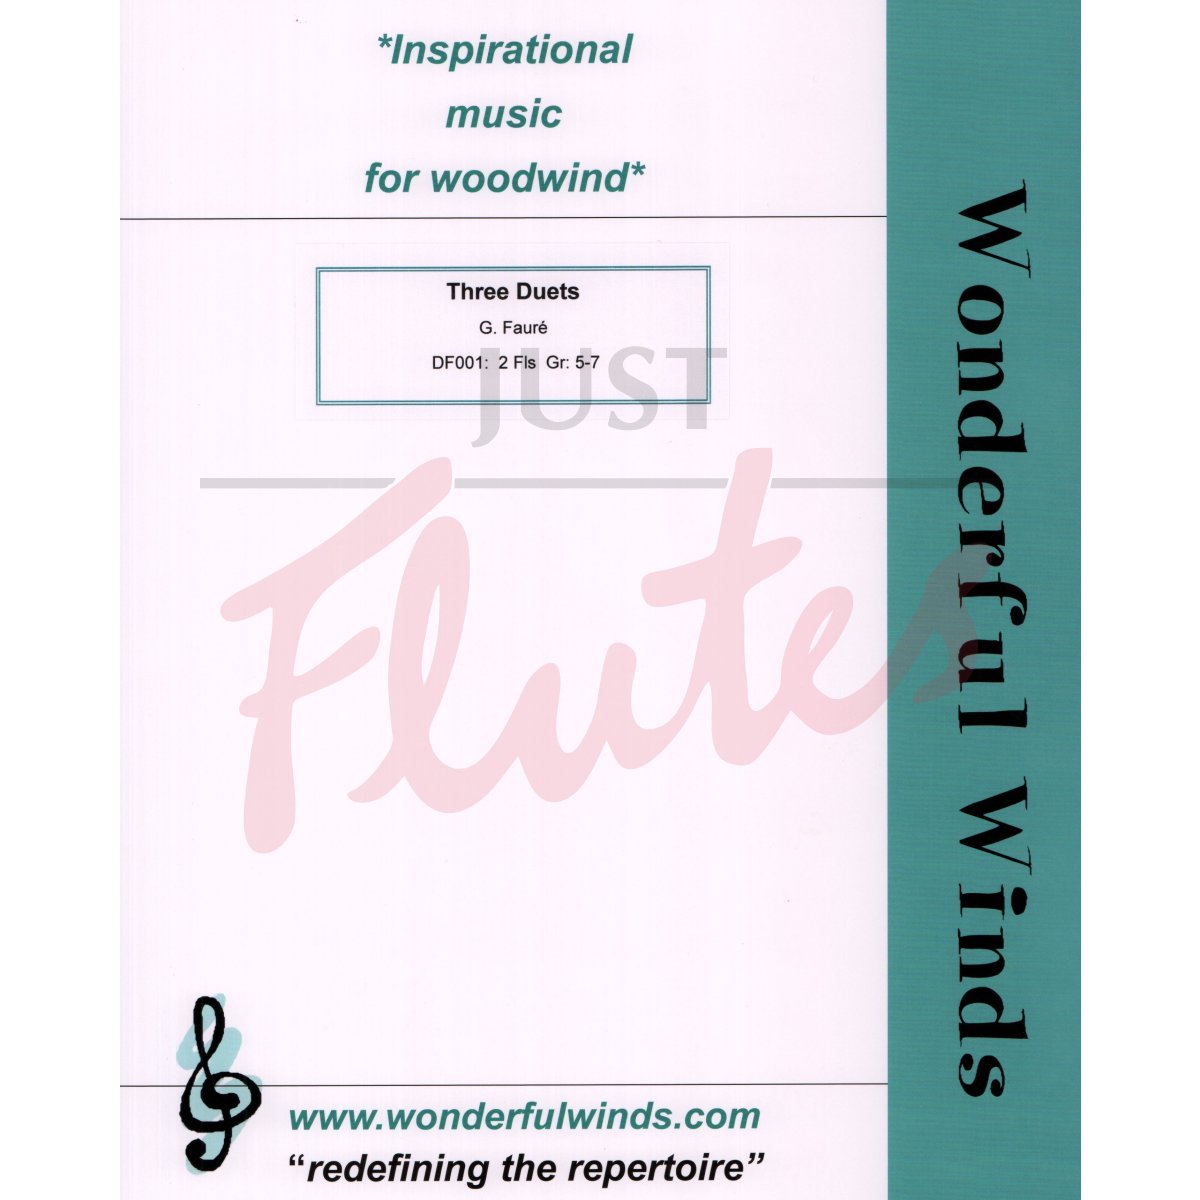 Three Duets for Two Flutes